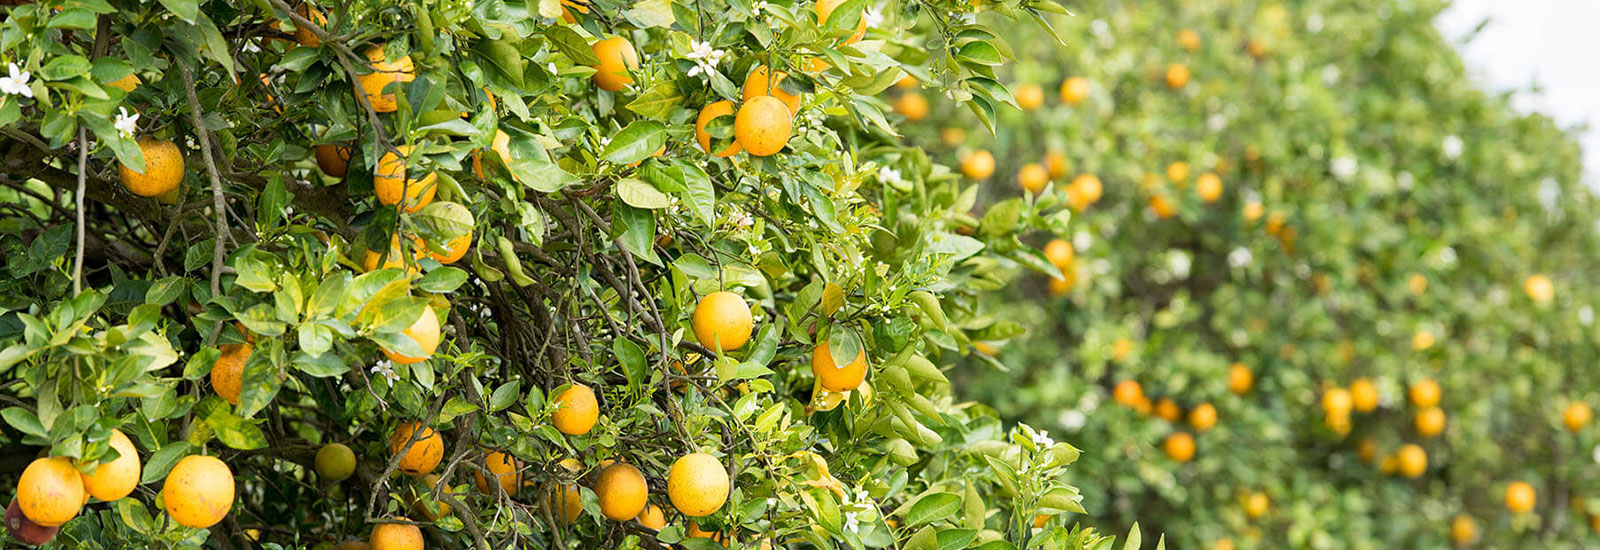 Engineering Citrus for Canker Resistance